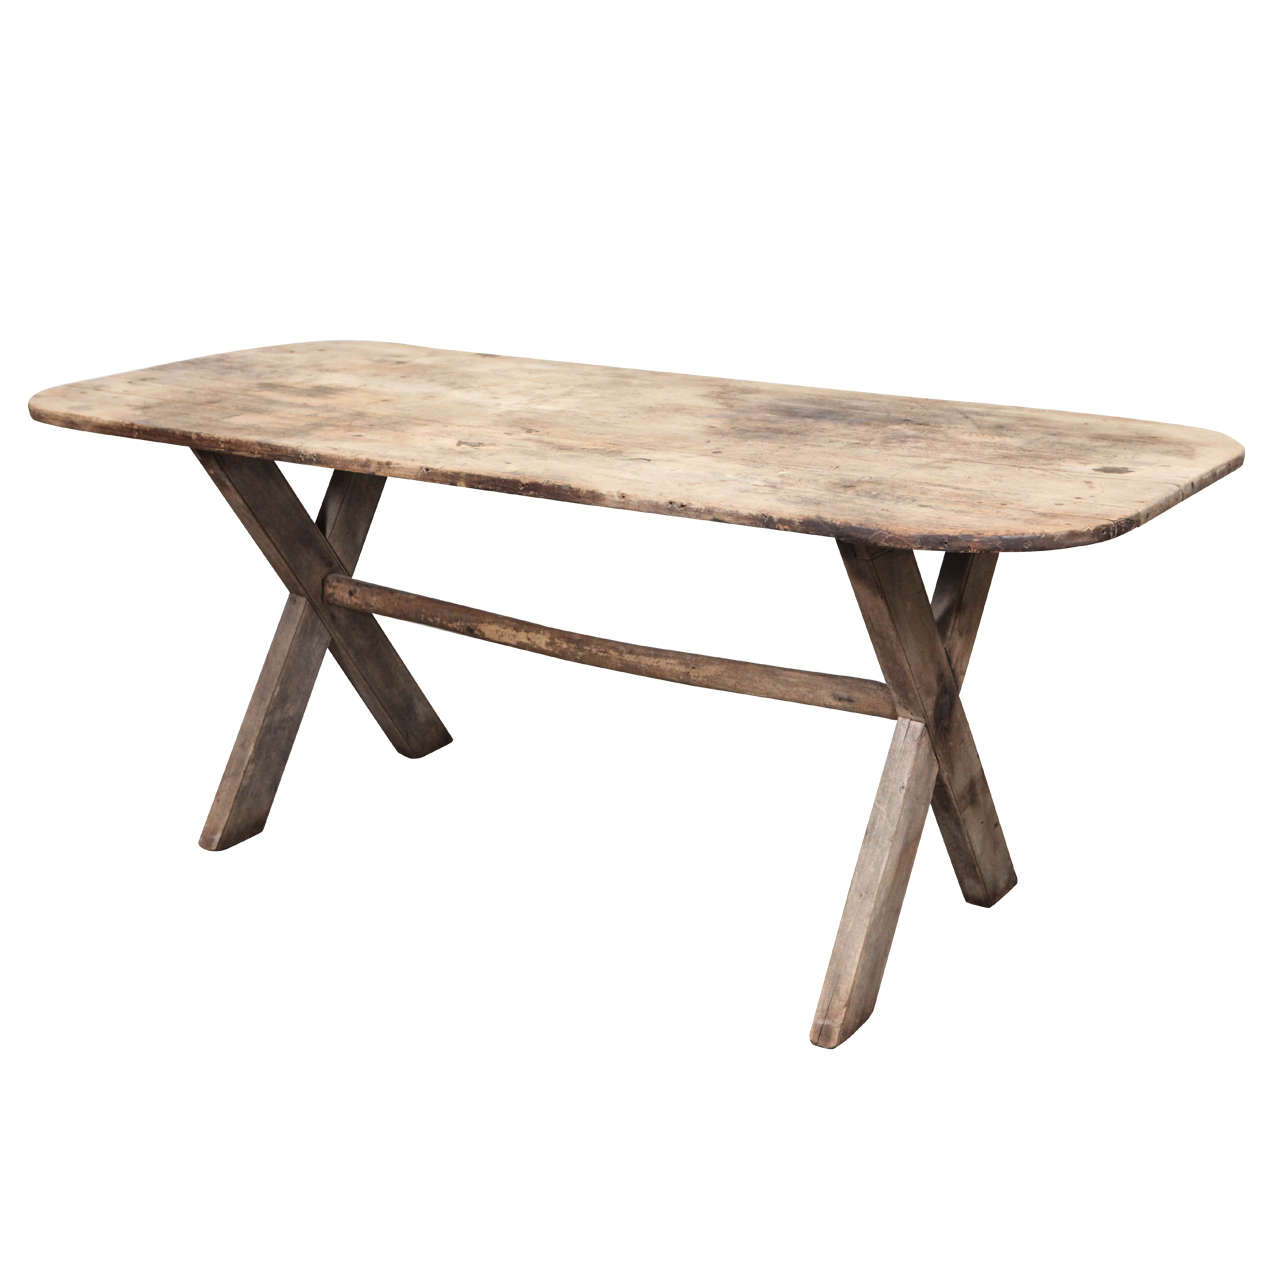 Rustic Dining Table with X Legs